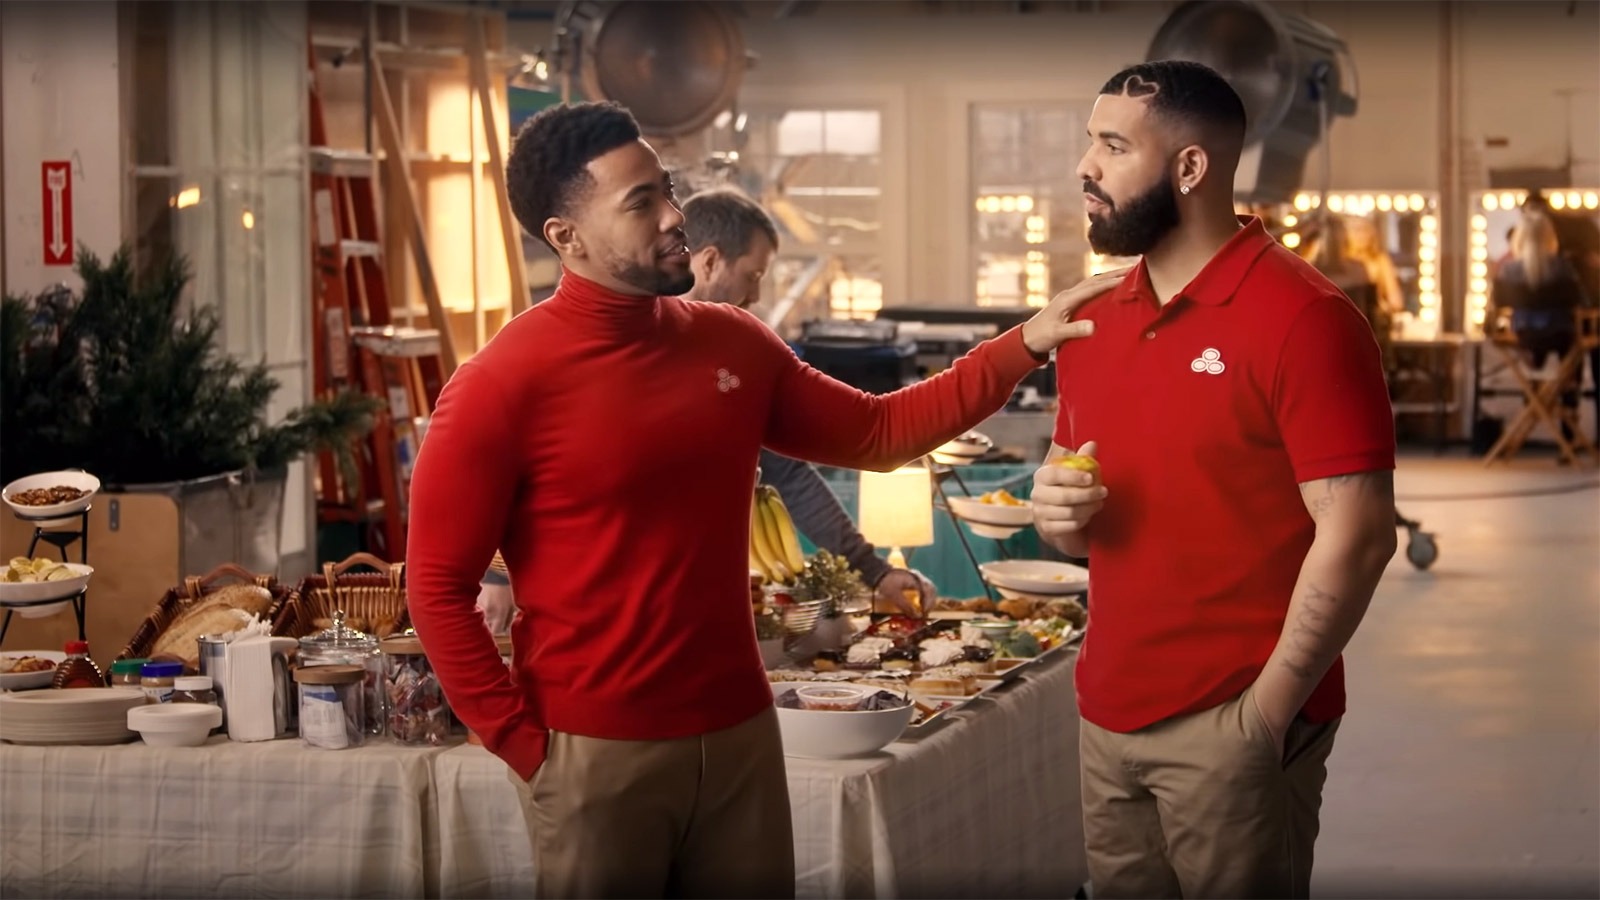 Drake & Jake, Mountain Dew’s millions & the Marvel Universe – which ads won the Super Bowl, & which fell flat